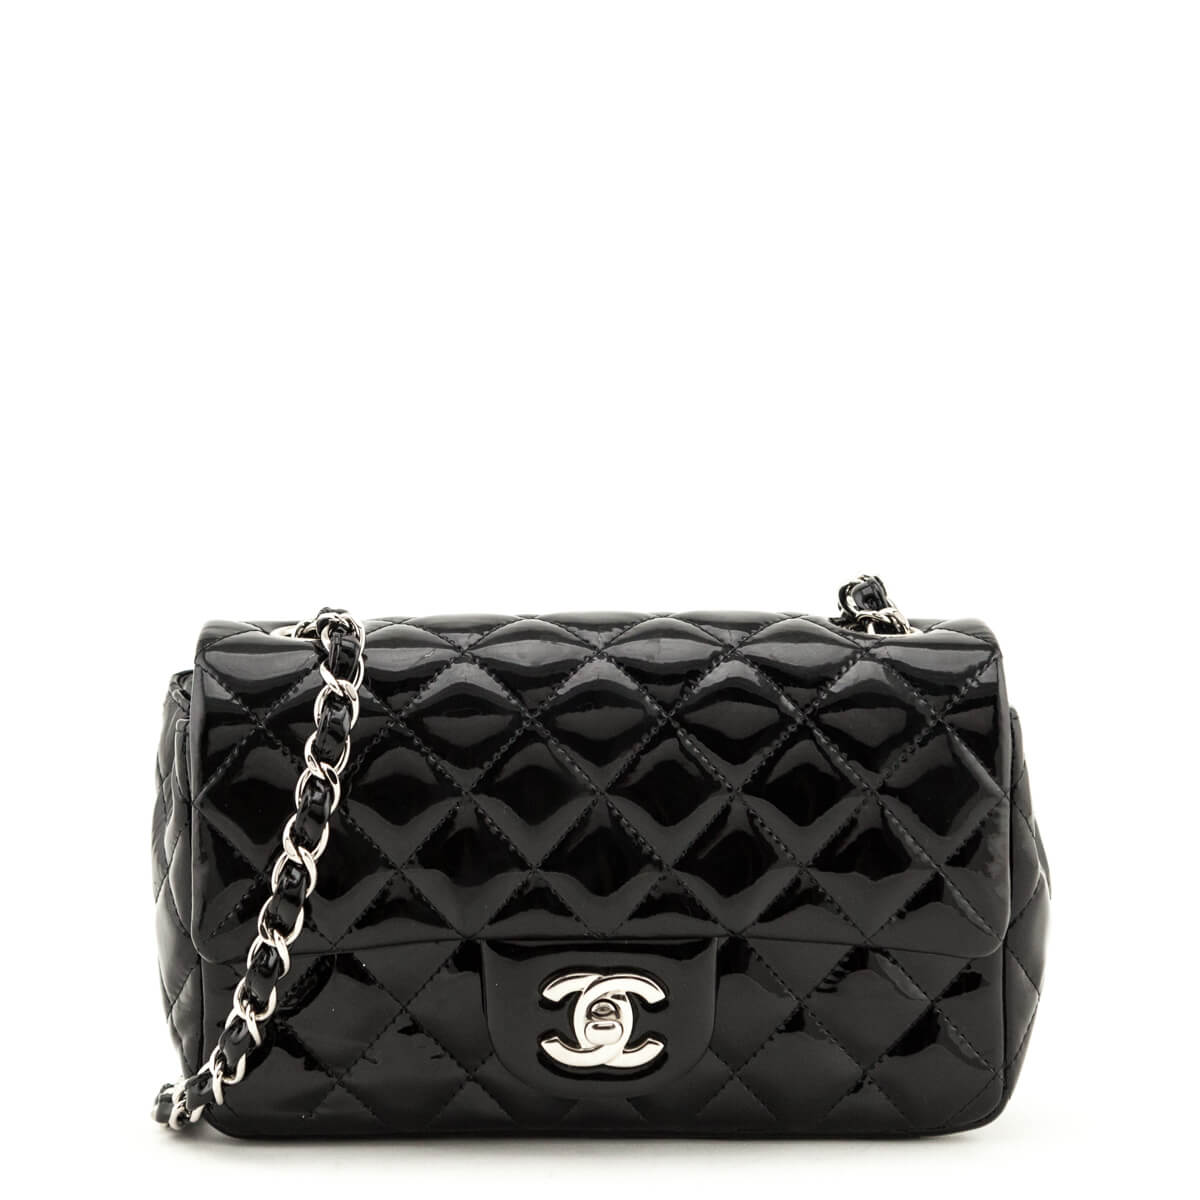 Chanel Black Patent Leather Quilted Mini Flap Bag SHW - Shop Chanel CA